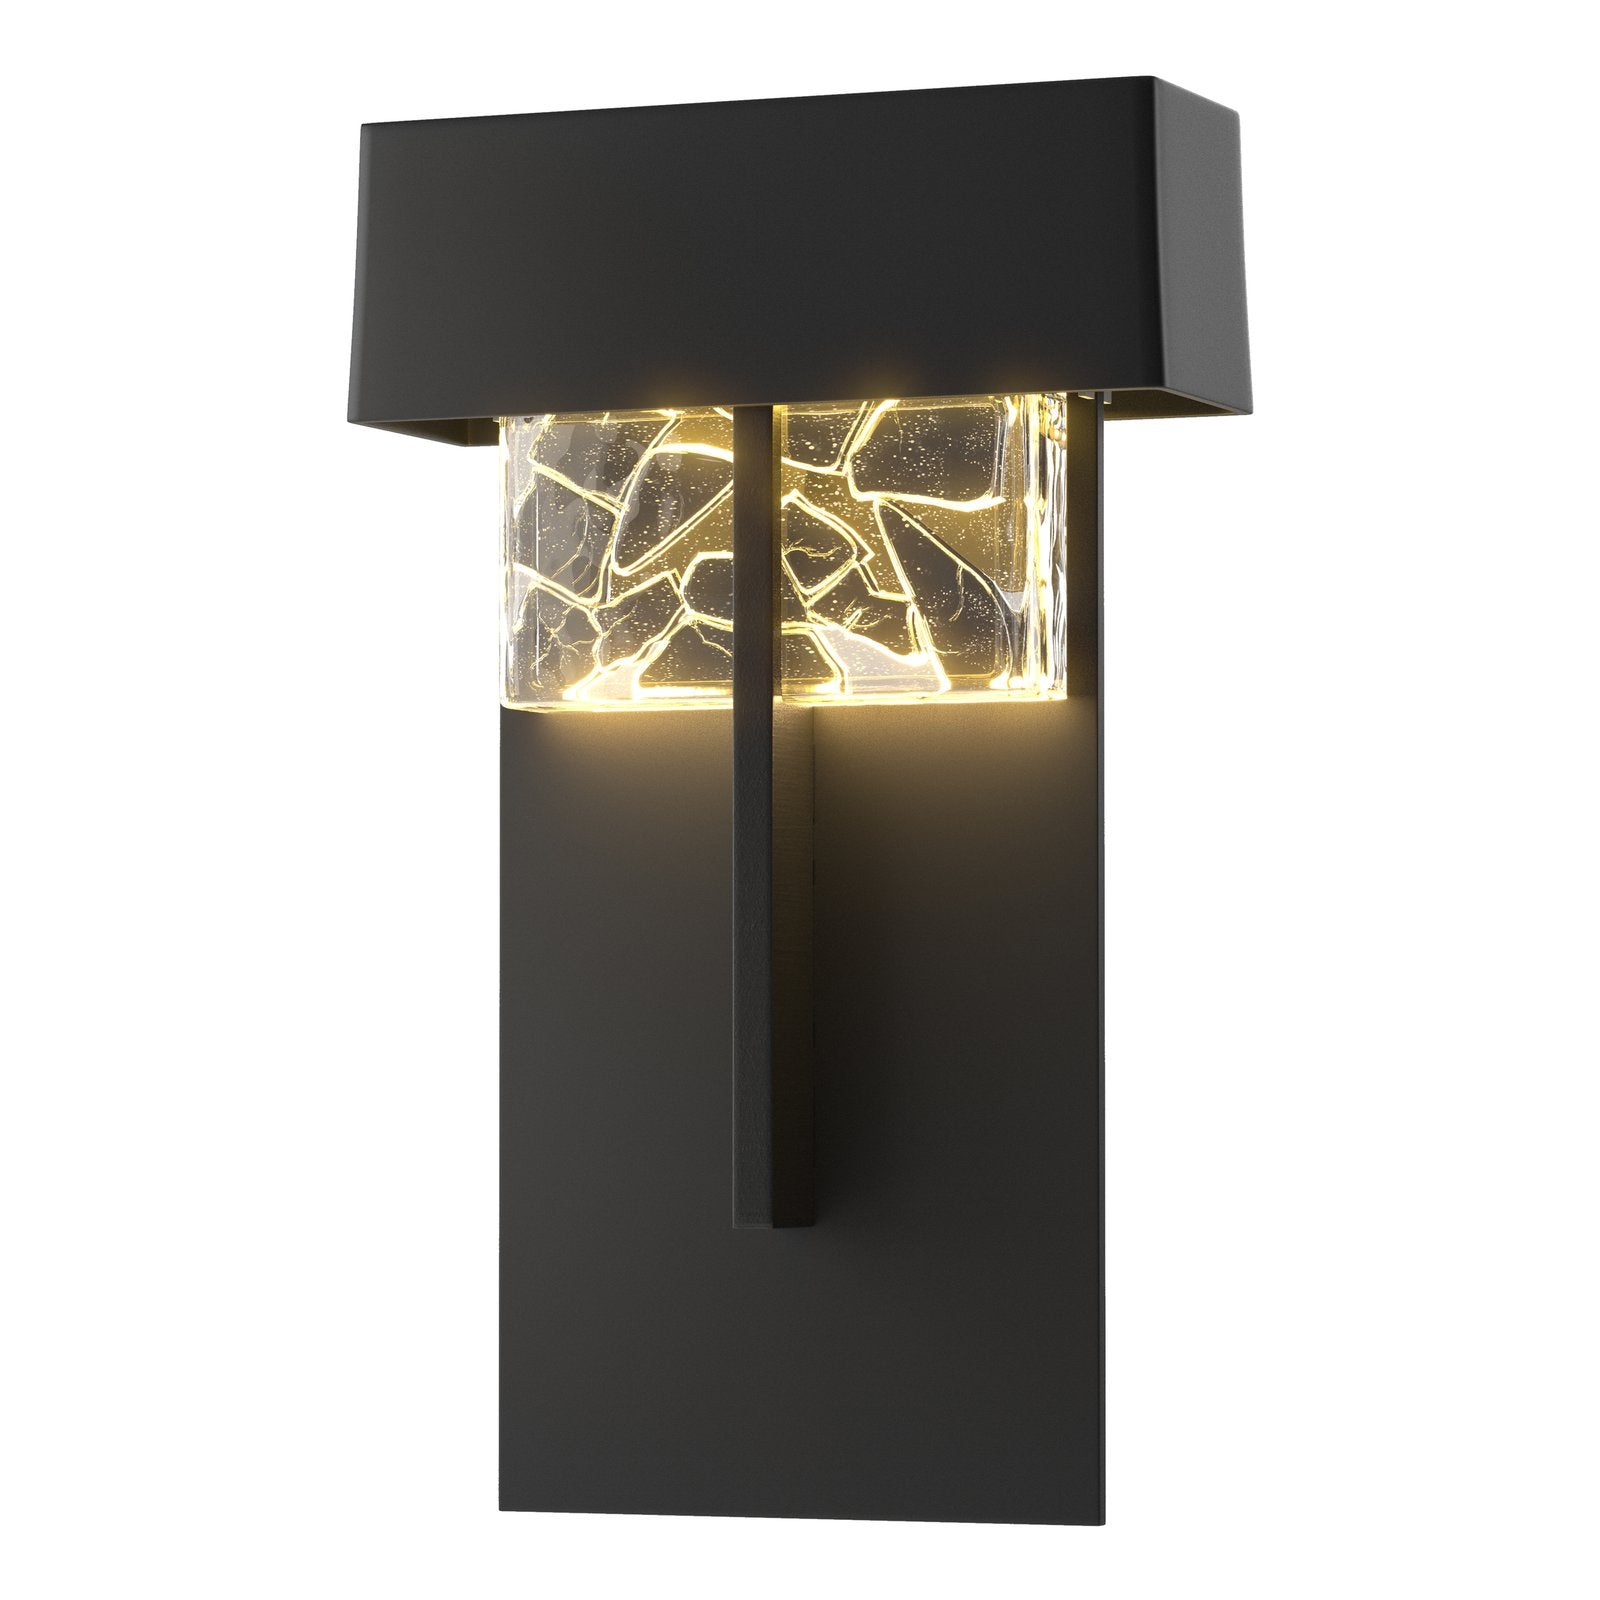 Shard LED Outdoor Sconce Outdoor l Wall Hubbardton Forge Coastal Black 8.6x14.1 Clear w/ Shards Glass (YP)